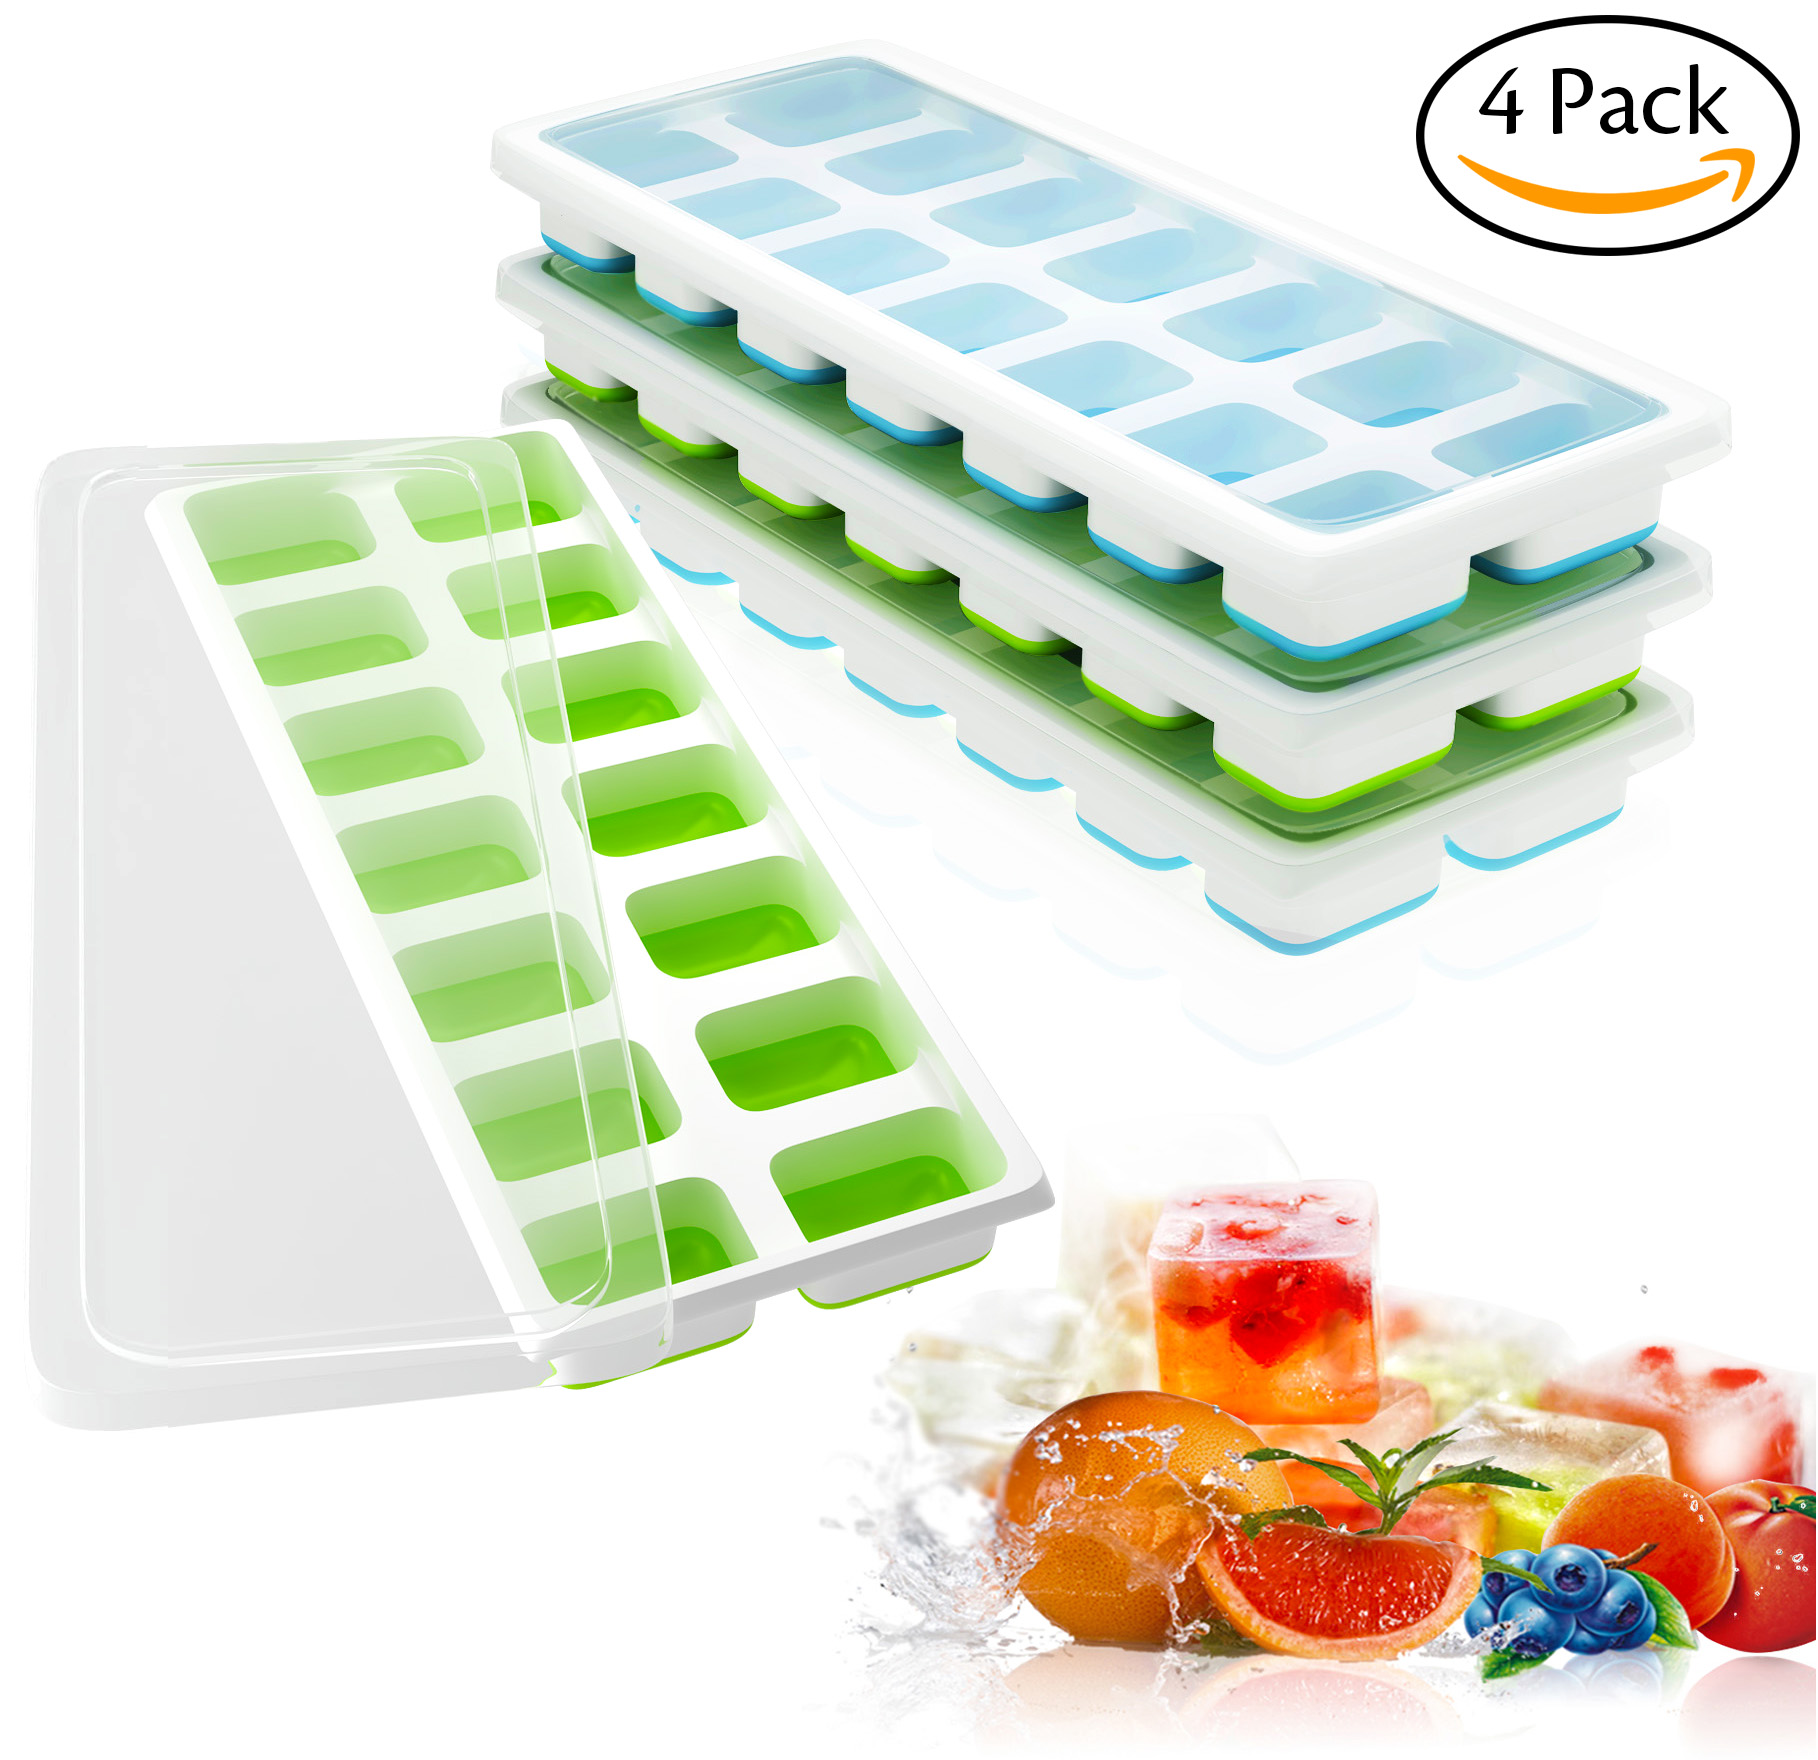 Ouddy 4 Pack Ice Cube Trays with Lid, Silicone Ice Cube Molds, 14-Ice Trays Can Make 56 Ice Cubes, BPA Free Nontoxic and Safe, Stackable Durable ( Blue & Green ) - Click Image to Close